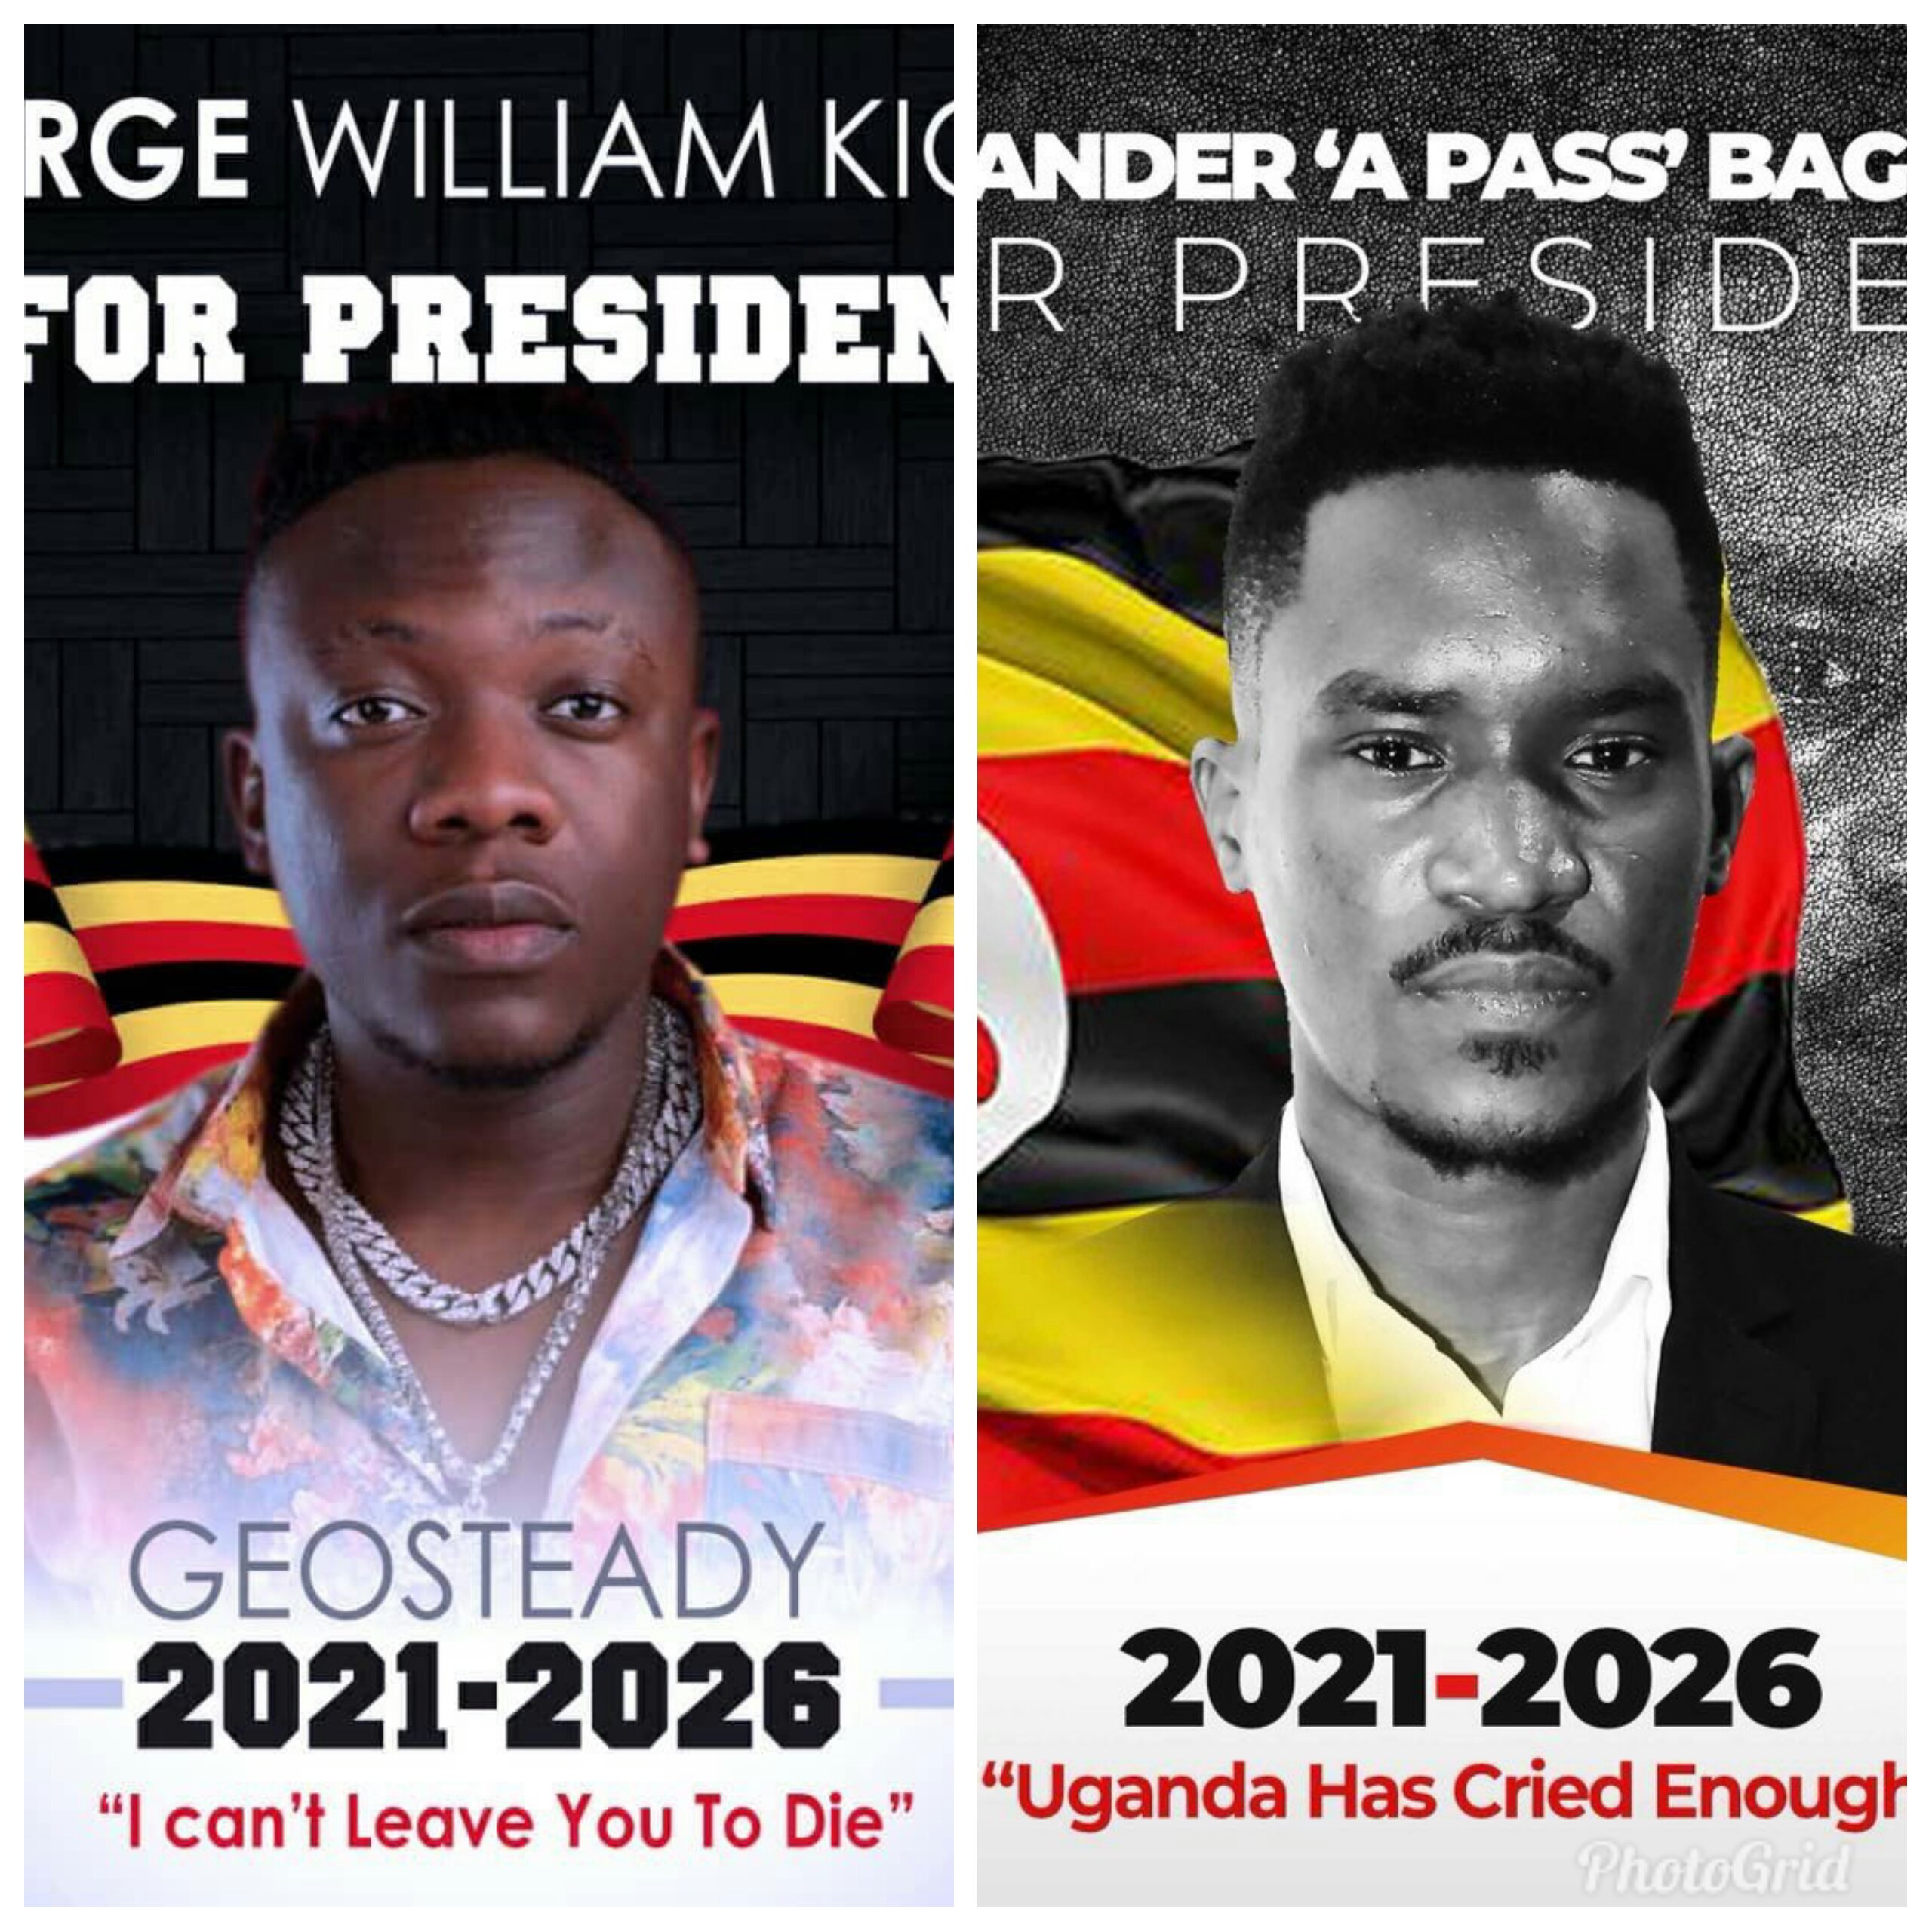 APASS Disses Geosteady’s Dress-code on Presidential Poster